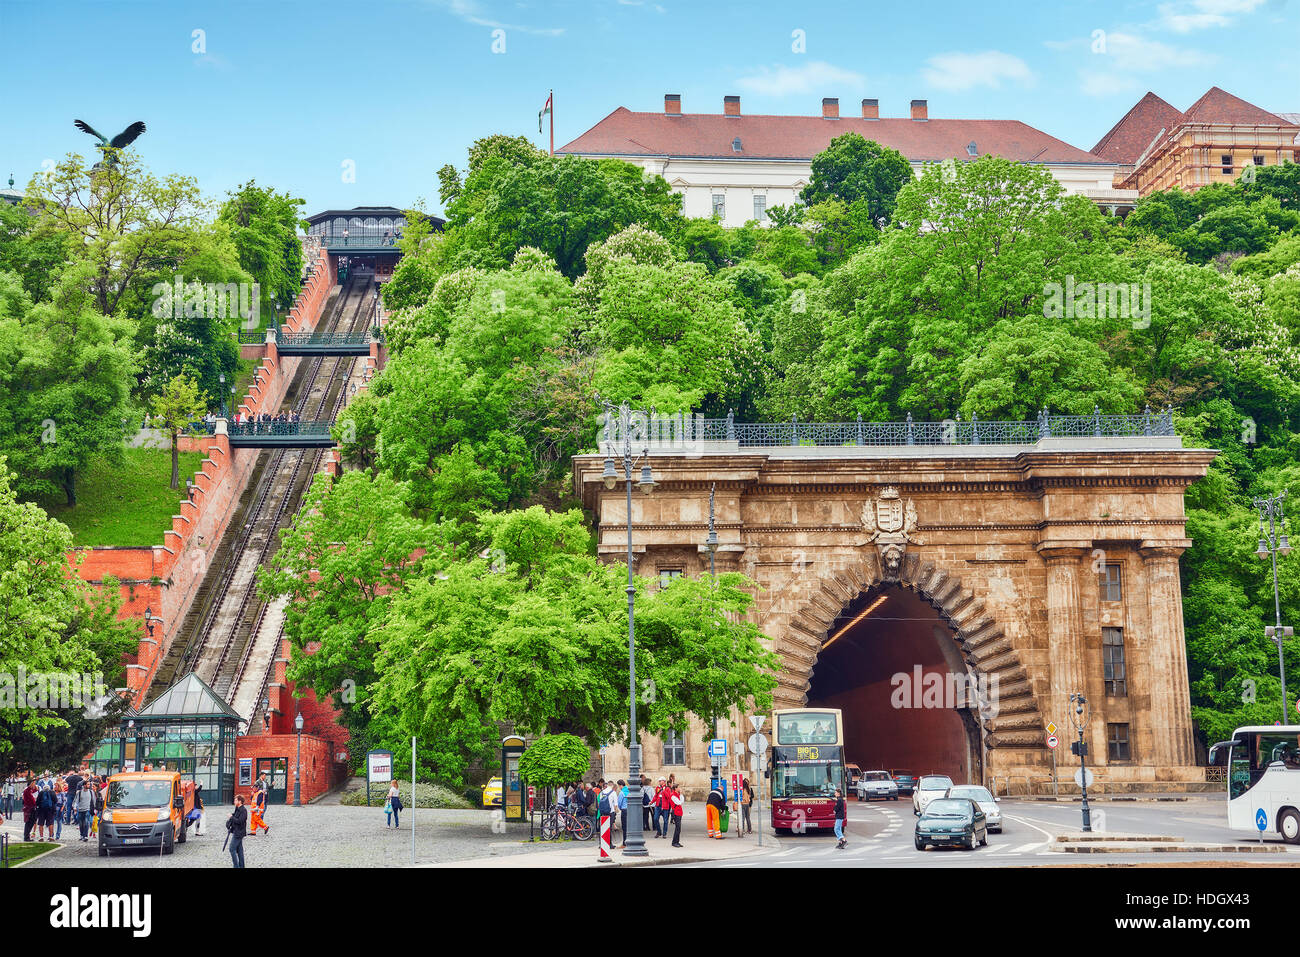 BUDAPEST, HANGARY-MAY 02, 2016: Funicular Royal Castle of Hungarian kings and road tunnel. Buda Hill Funicular was destroyed in World War II and rebui Stock Photo